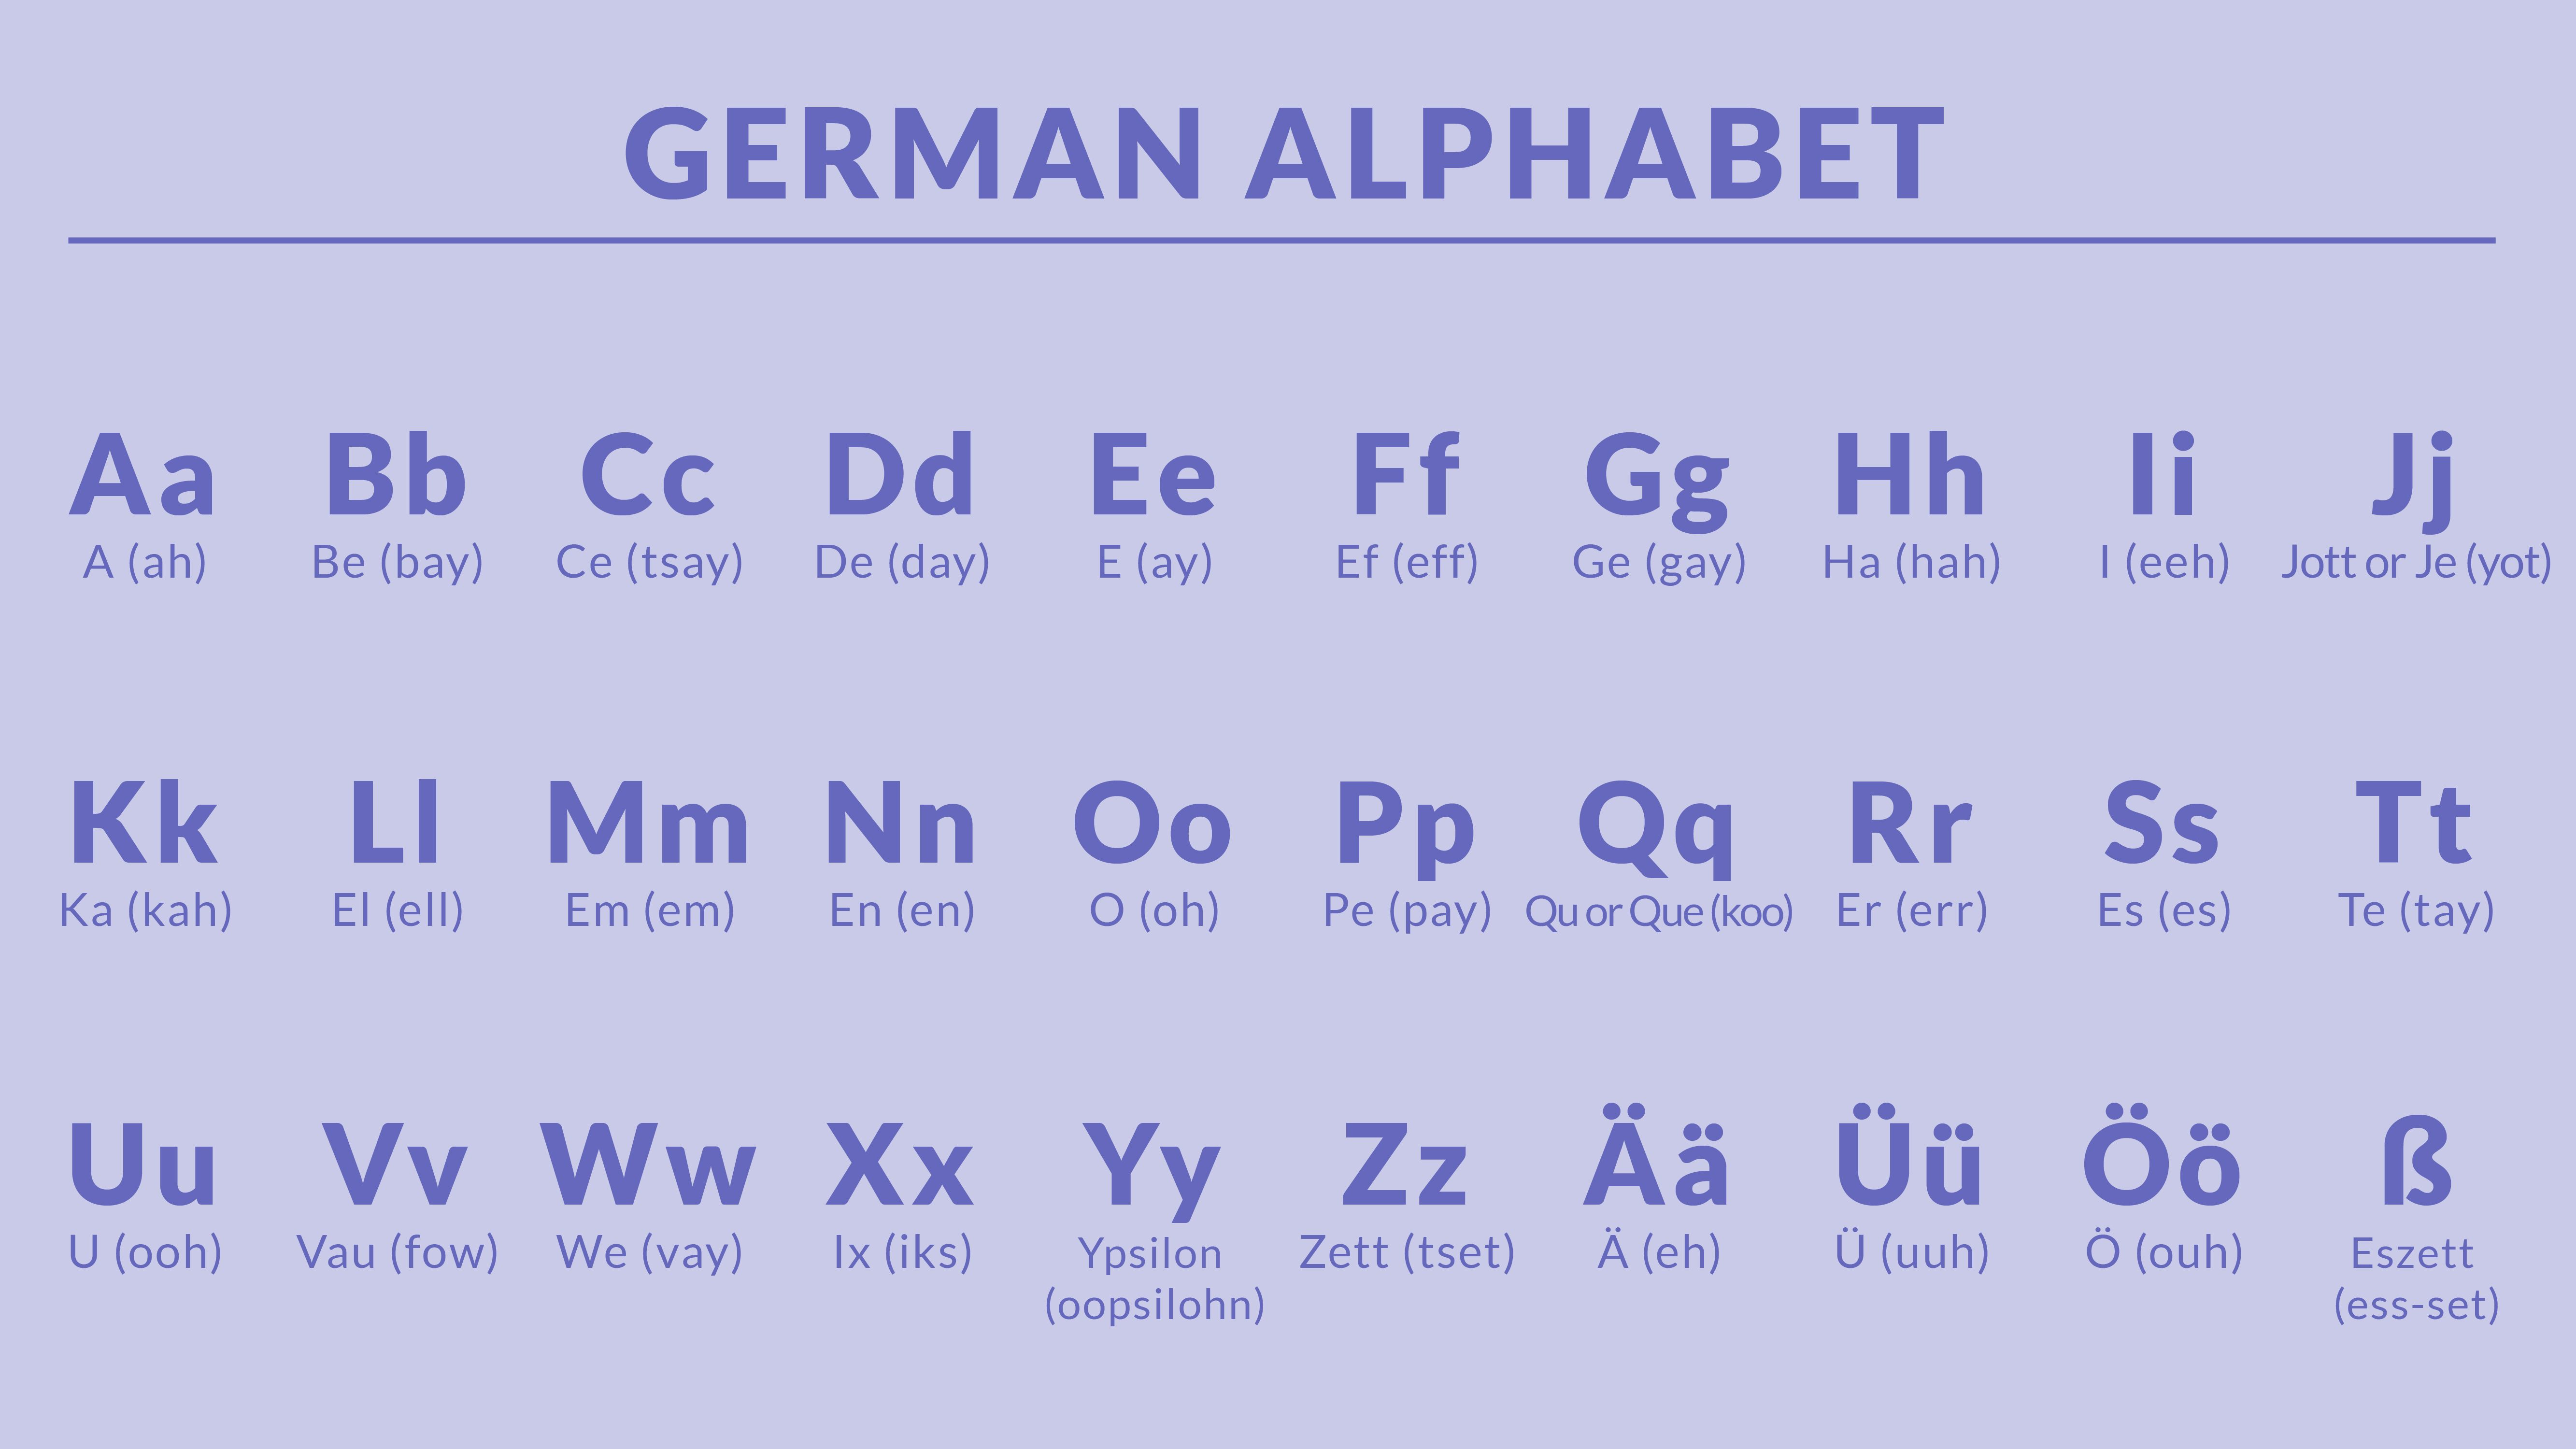  Iggy, as a teacher, stands in front of the blackboard, pointing at the umlauts and the eszett of the German alphabet written on the board.